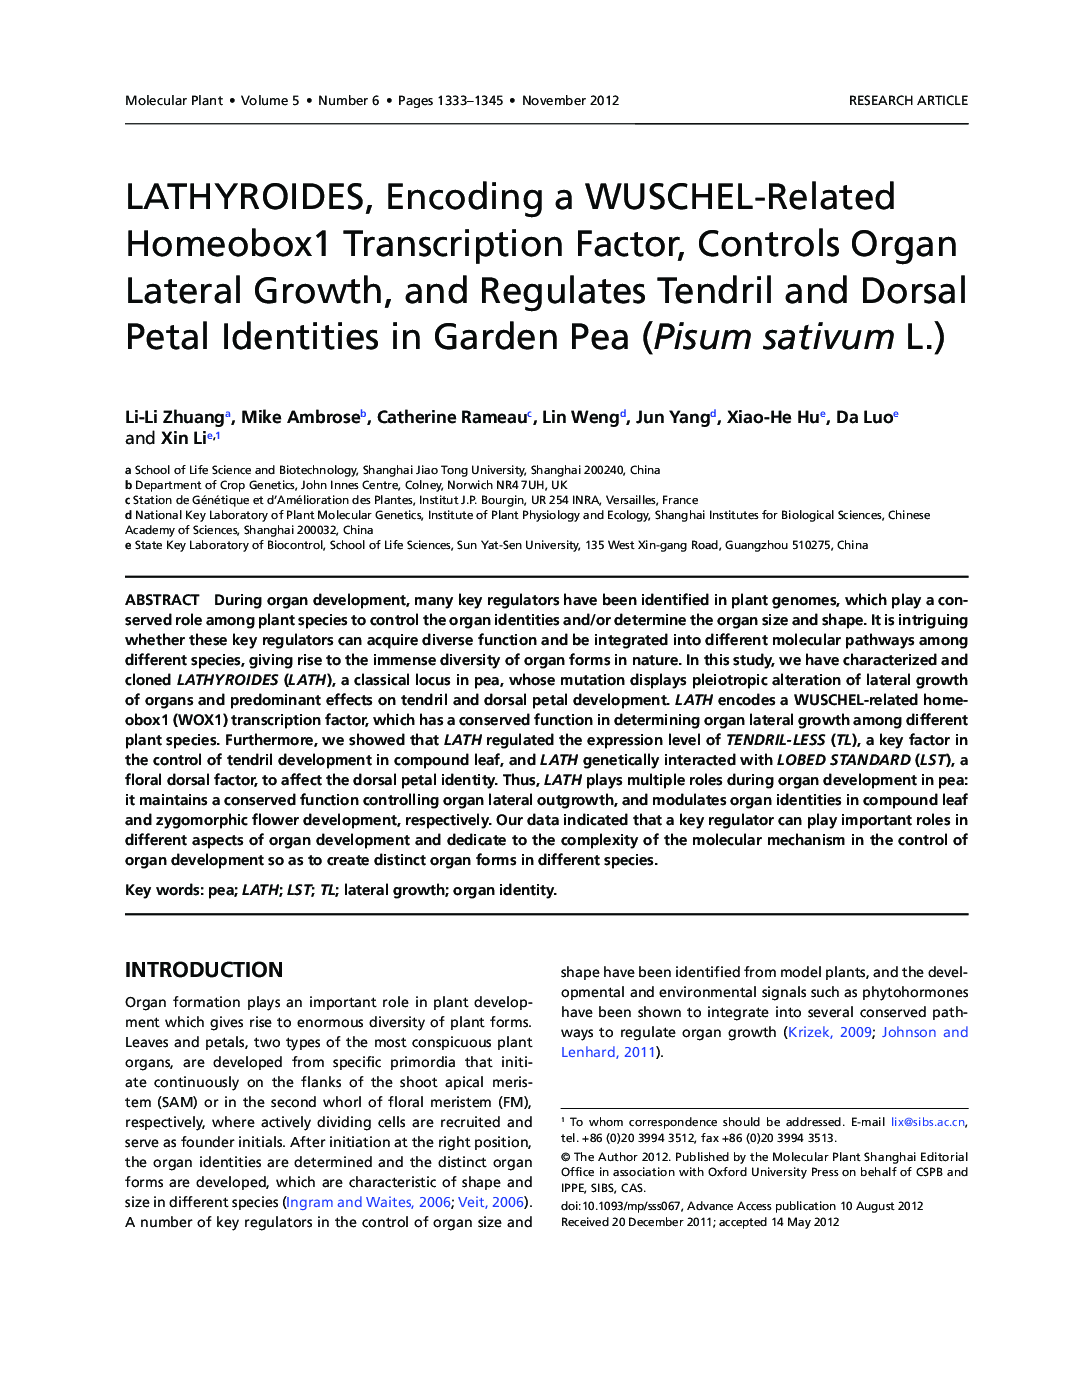 LATHYROIDES, Encoding a WUSCHEL-Related Homeobox1 Transcription Factor, Controls Organ Lateral Growth, and Regulates Tendril and Dorsal Petal Identities in Garden Pea (Pisum sativum L.) 